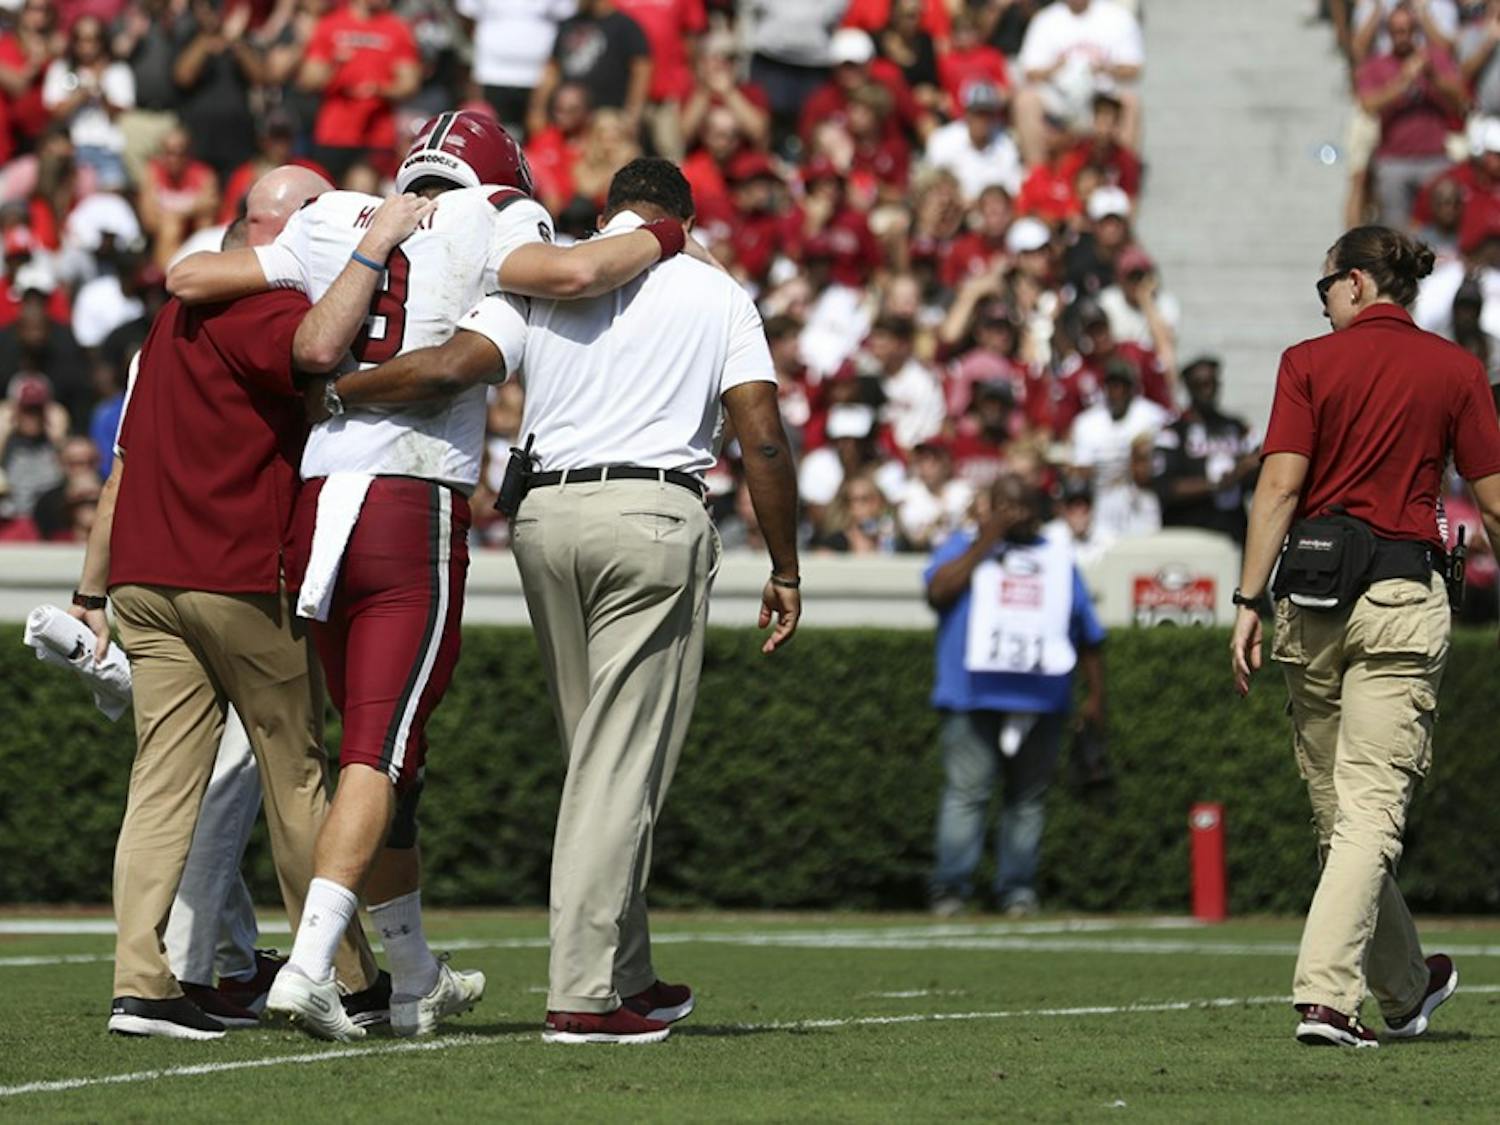 Freshman quarterback Ryan Hilinski is helped off the field after a knee injury during the third quarter.